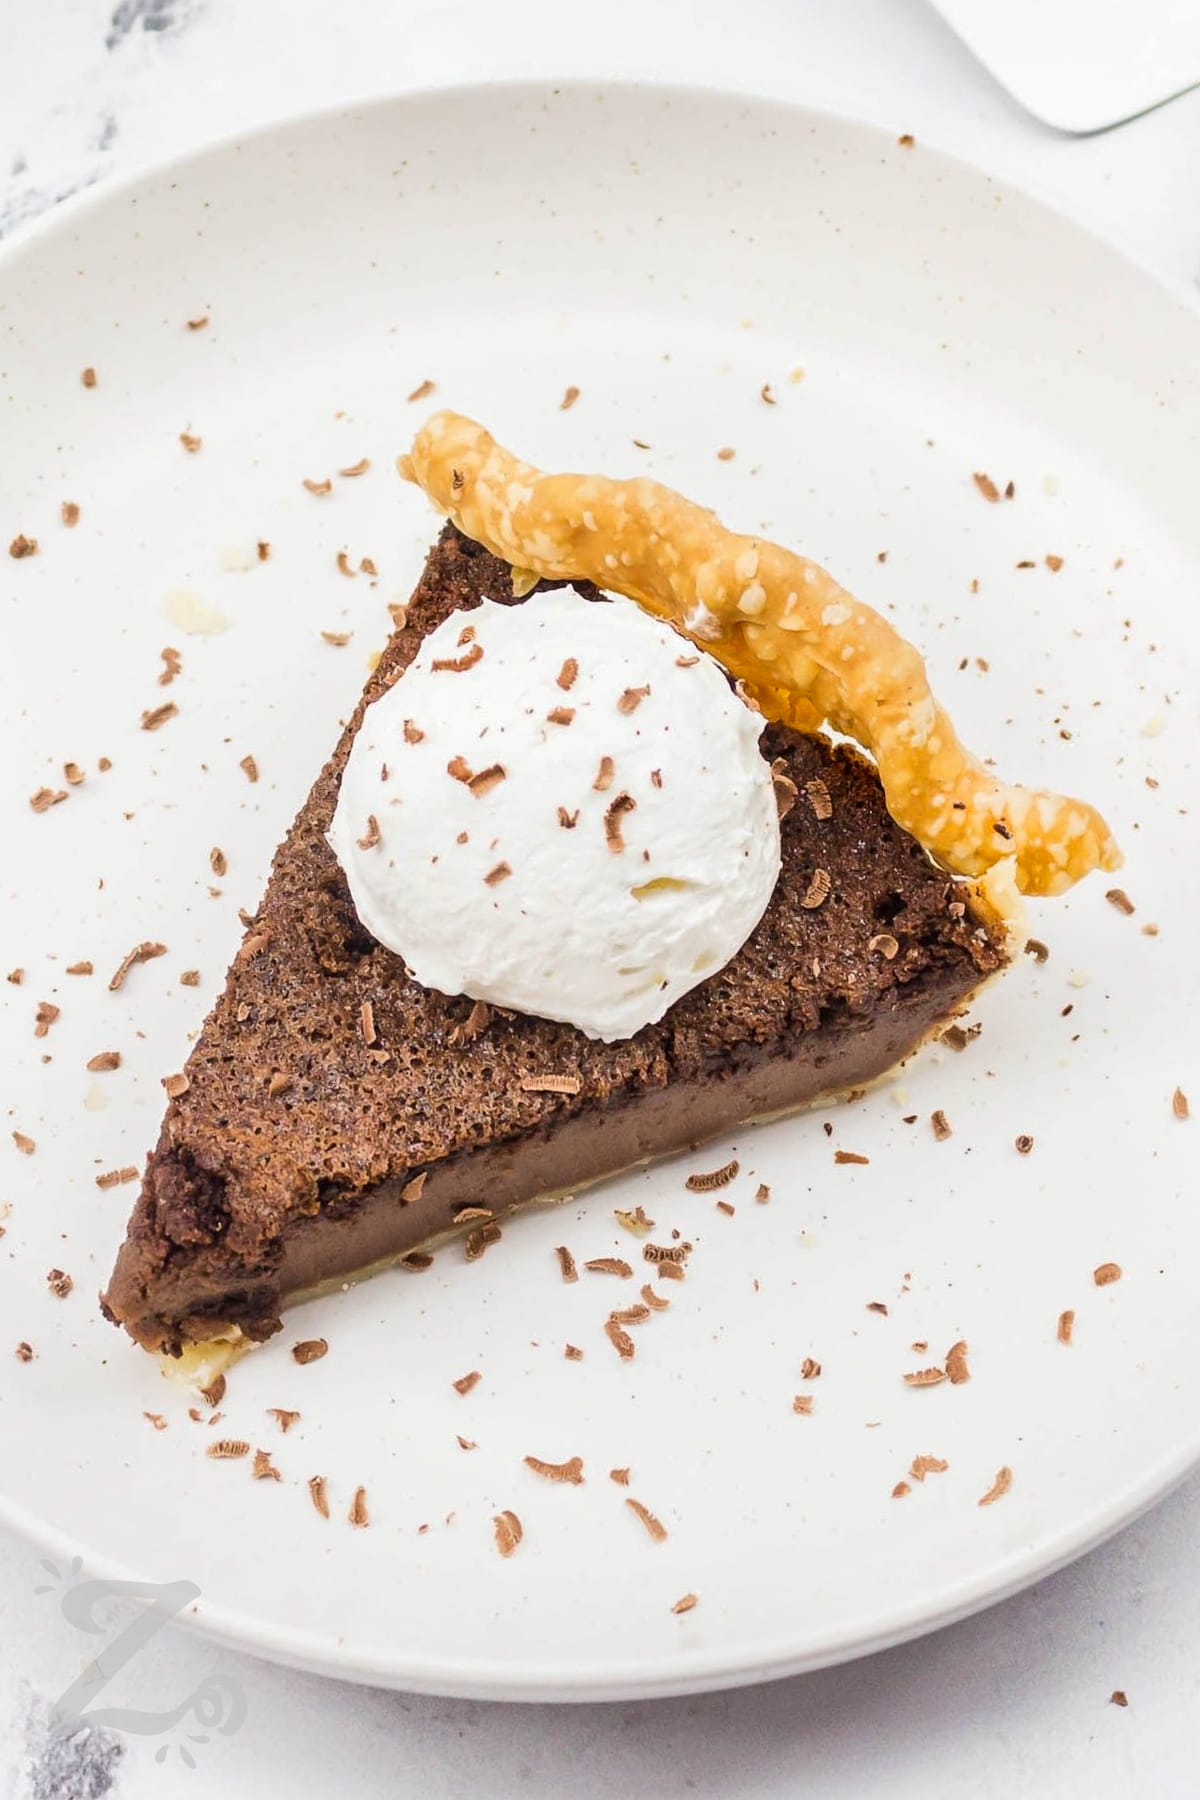 A slice of chocolate chess pie topped with whipped cream and chocolate shavings